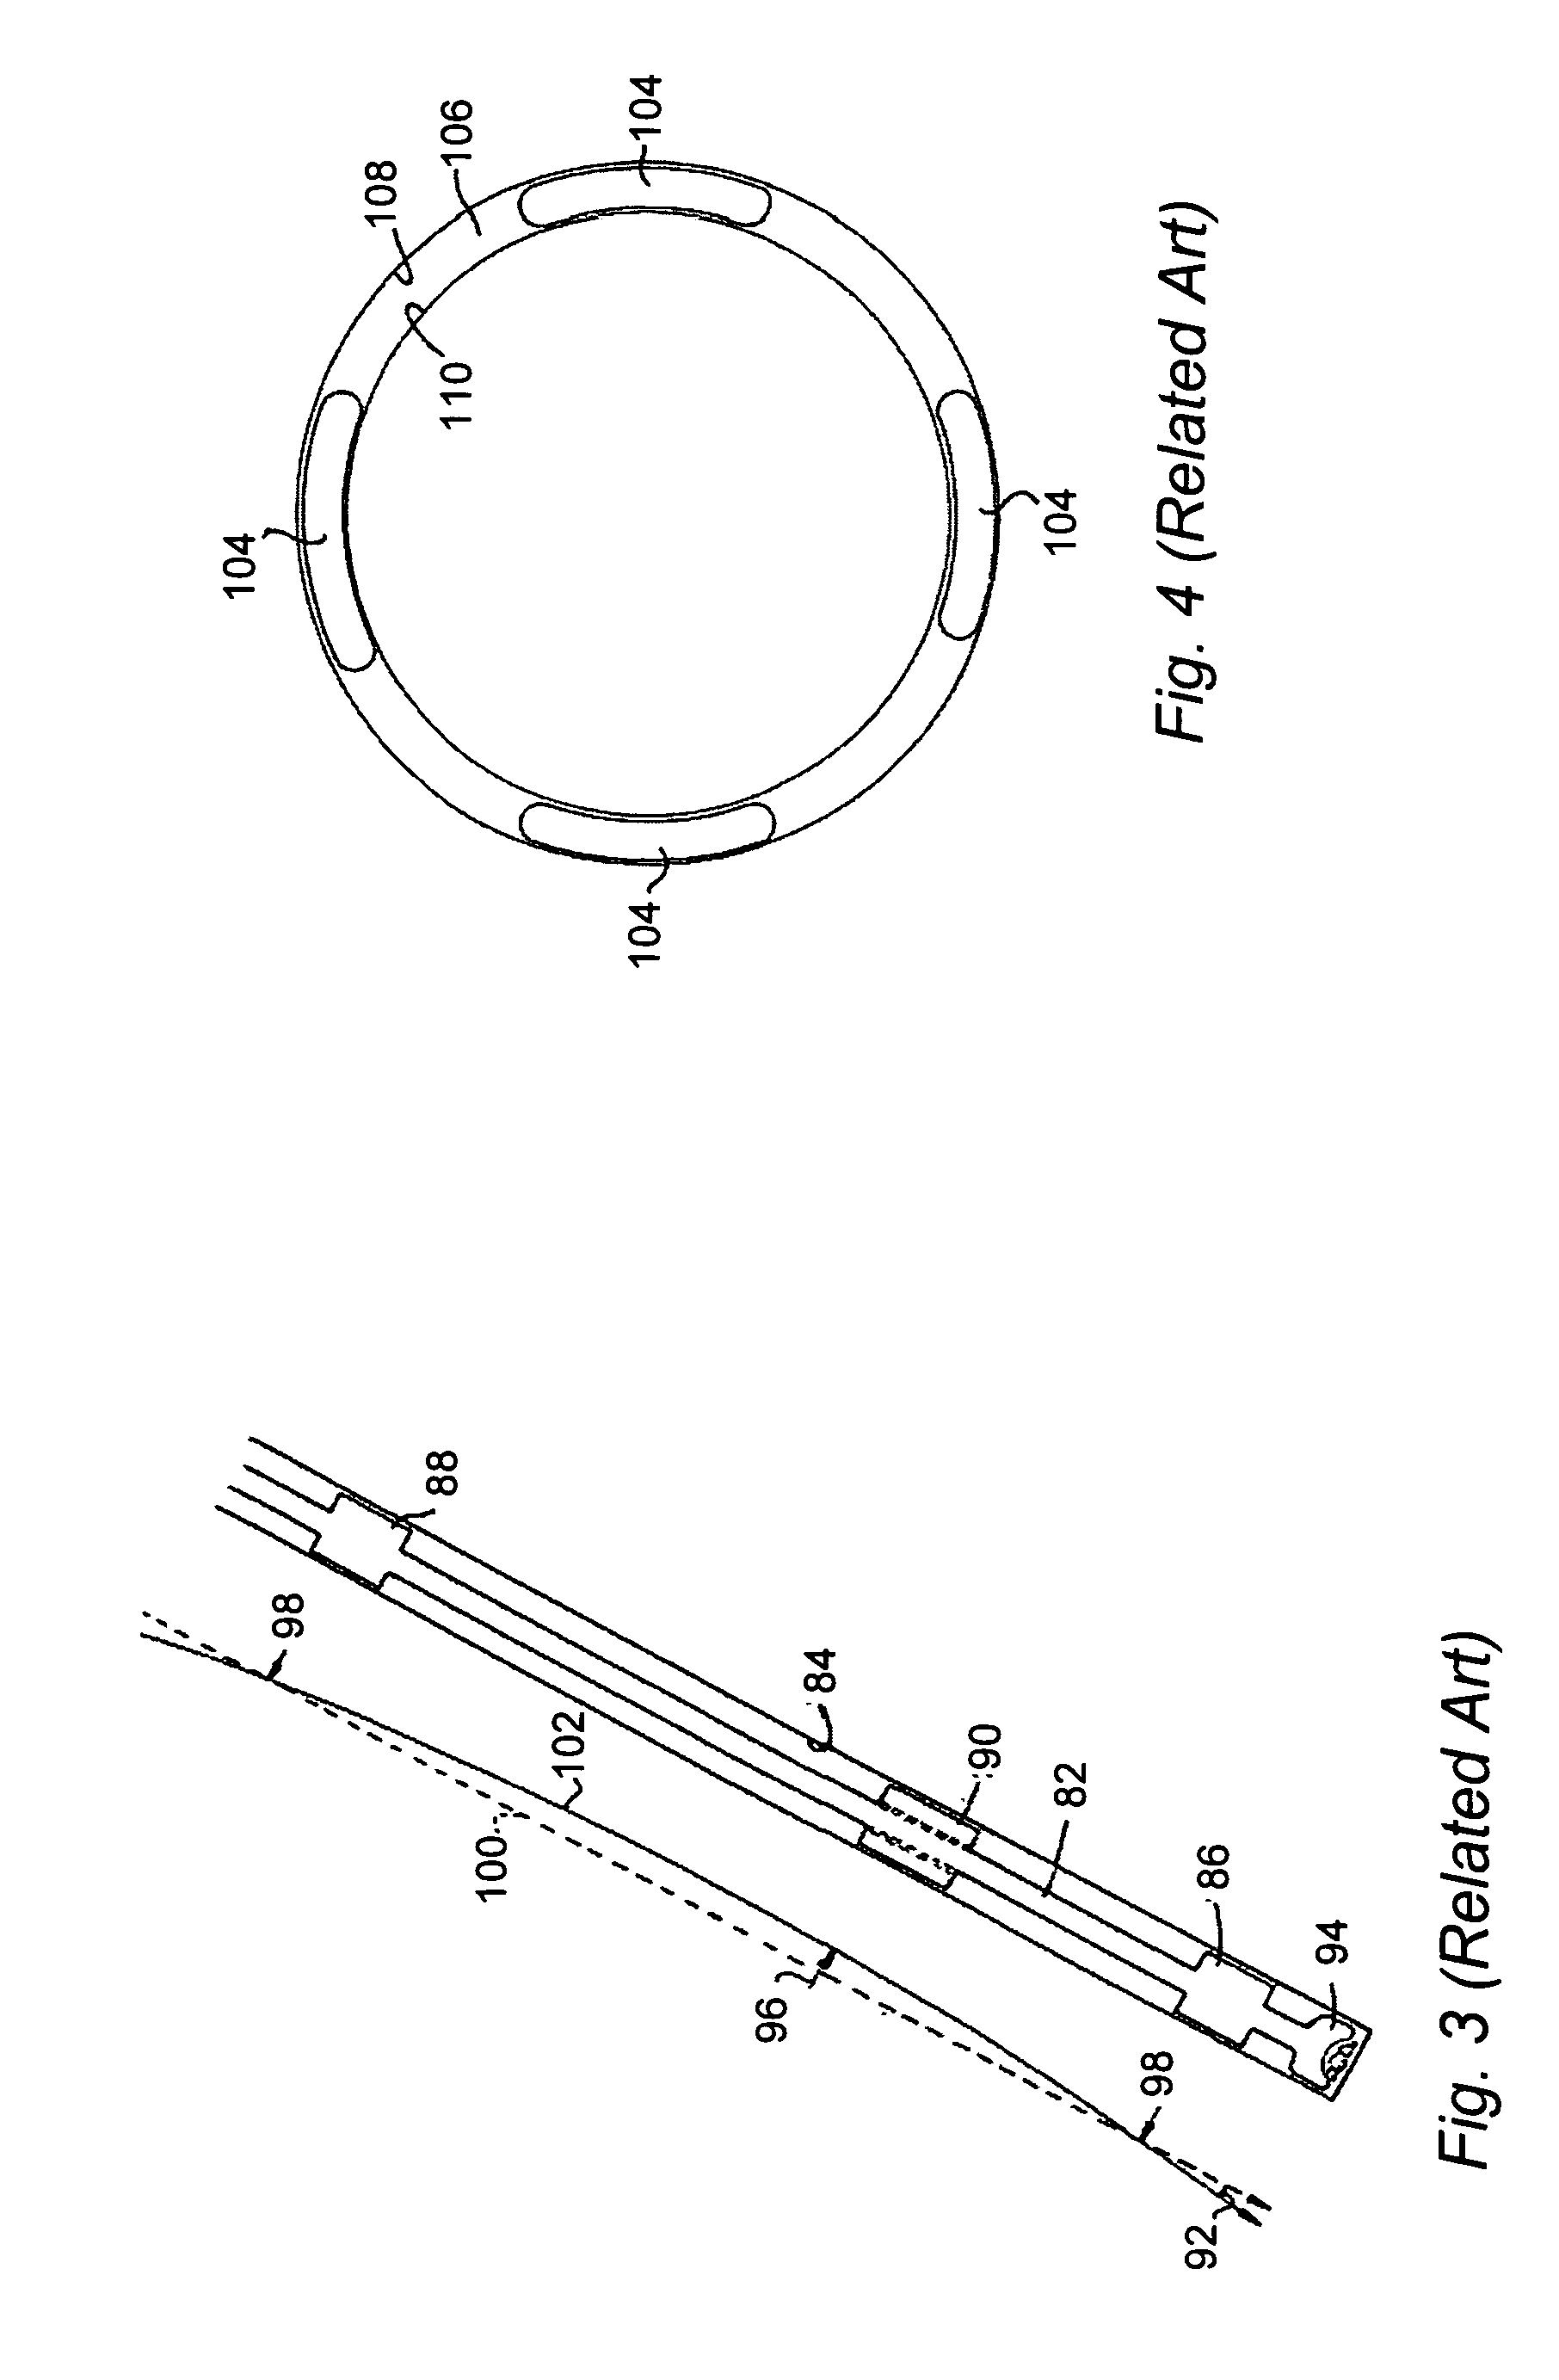 Systems and methods for directionally drilling a borehole using a continuously variable transmission